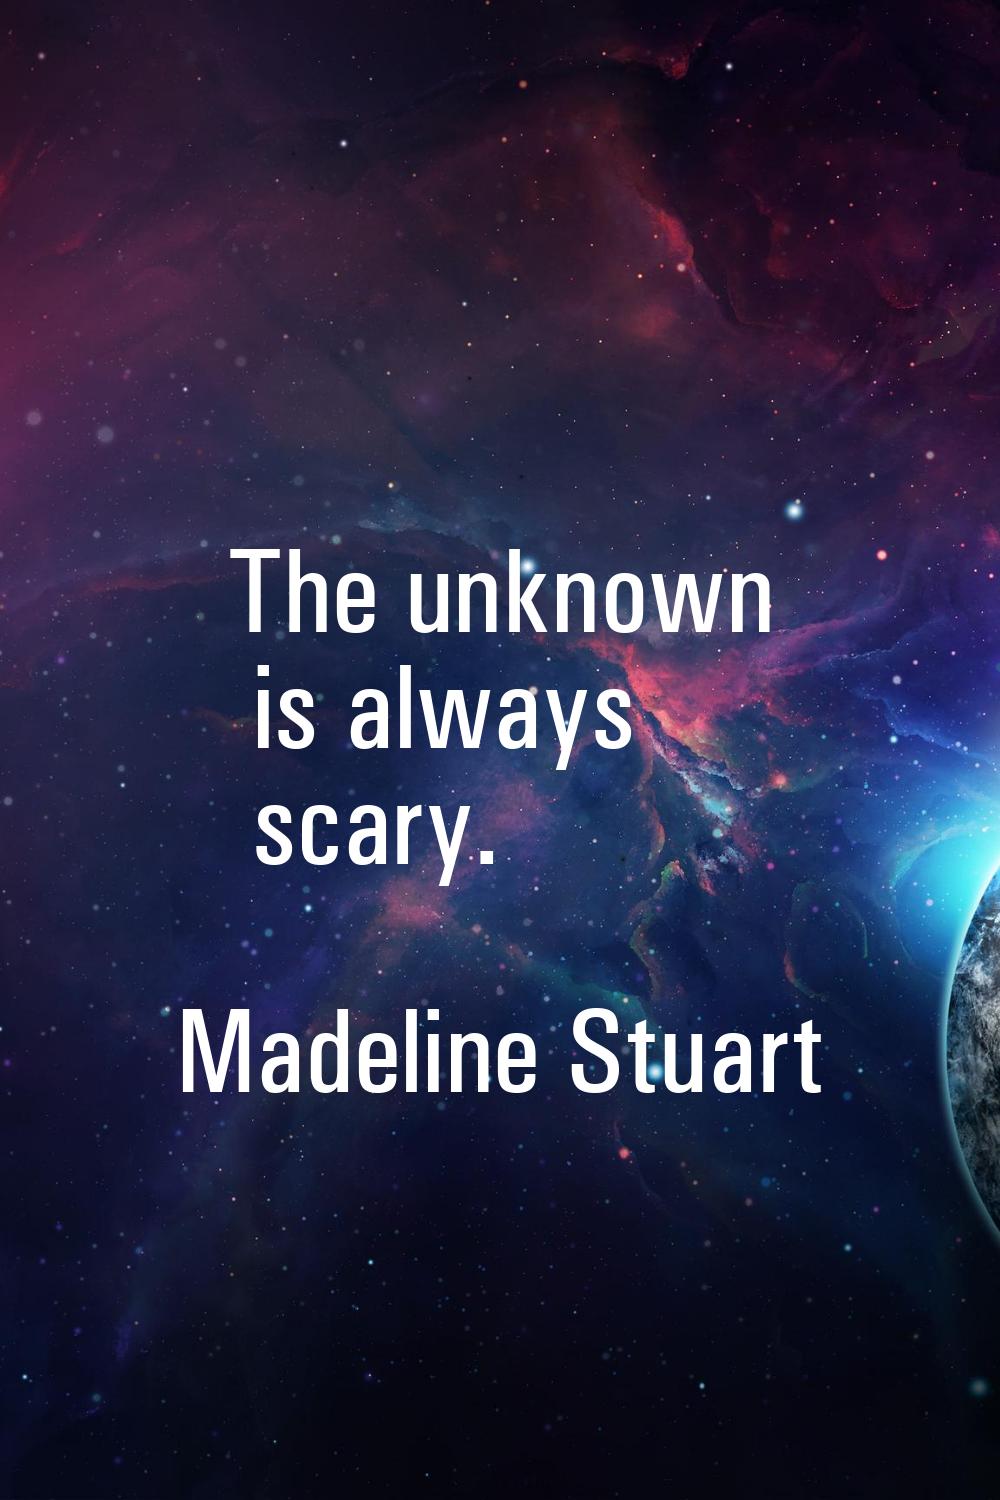 The unknown is always scary.